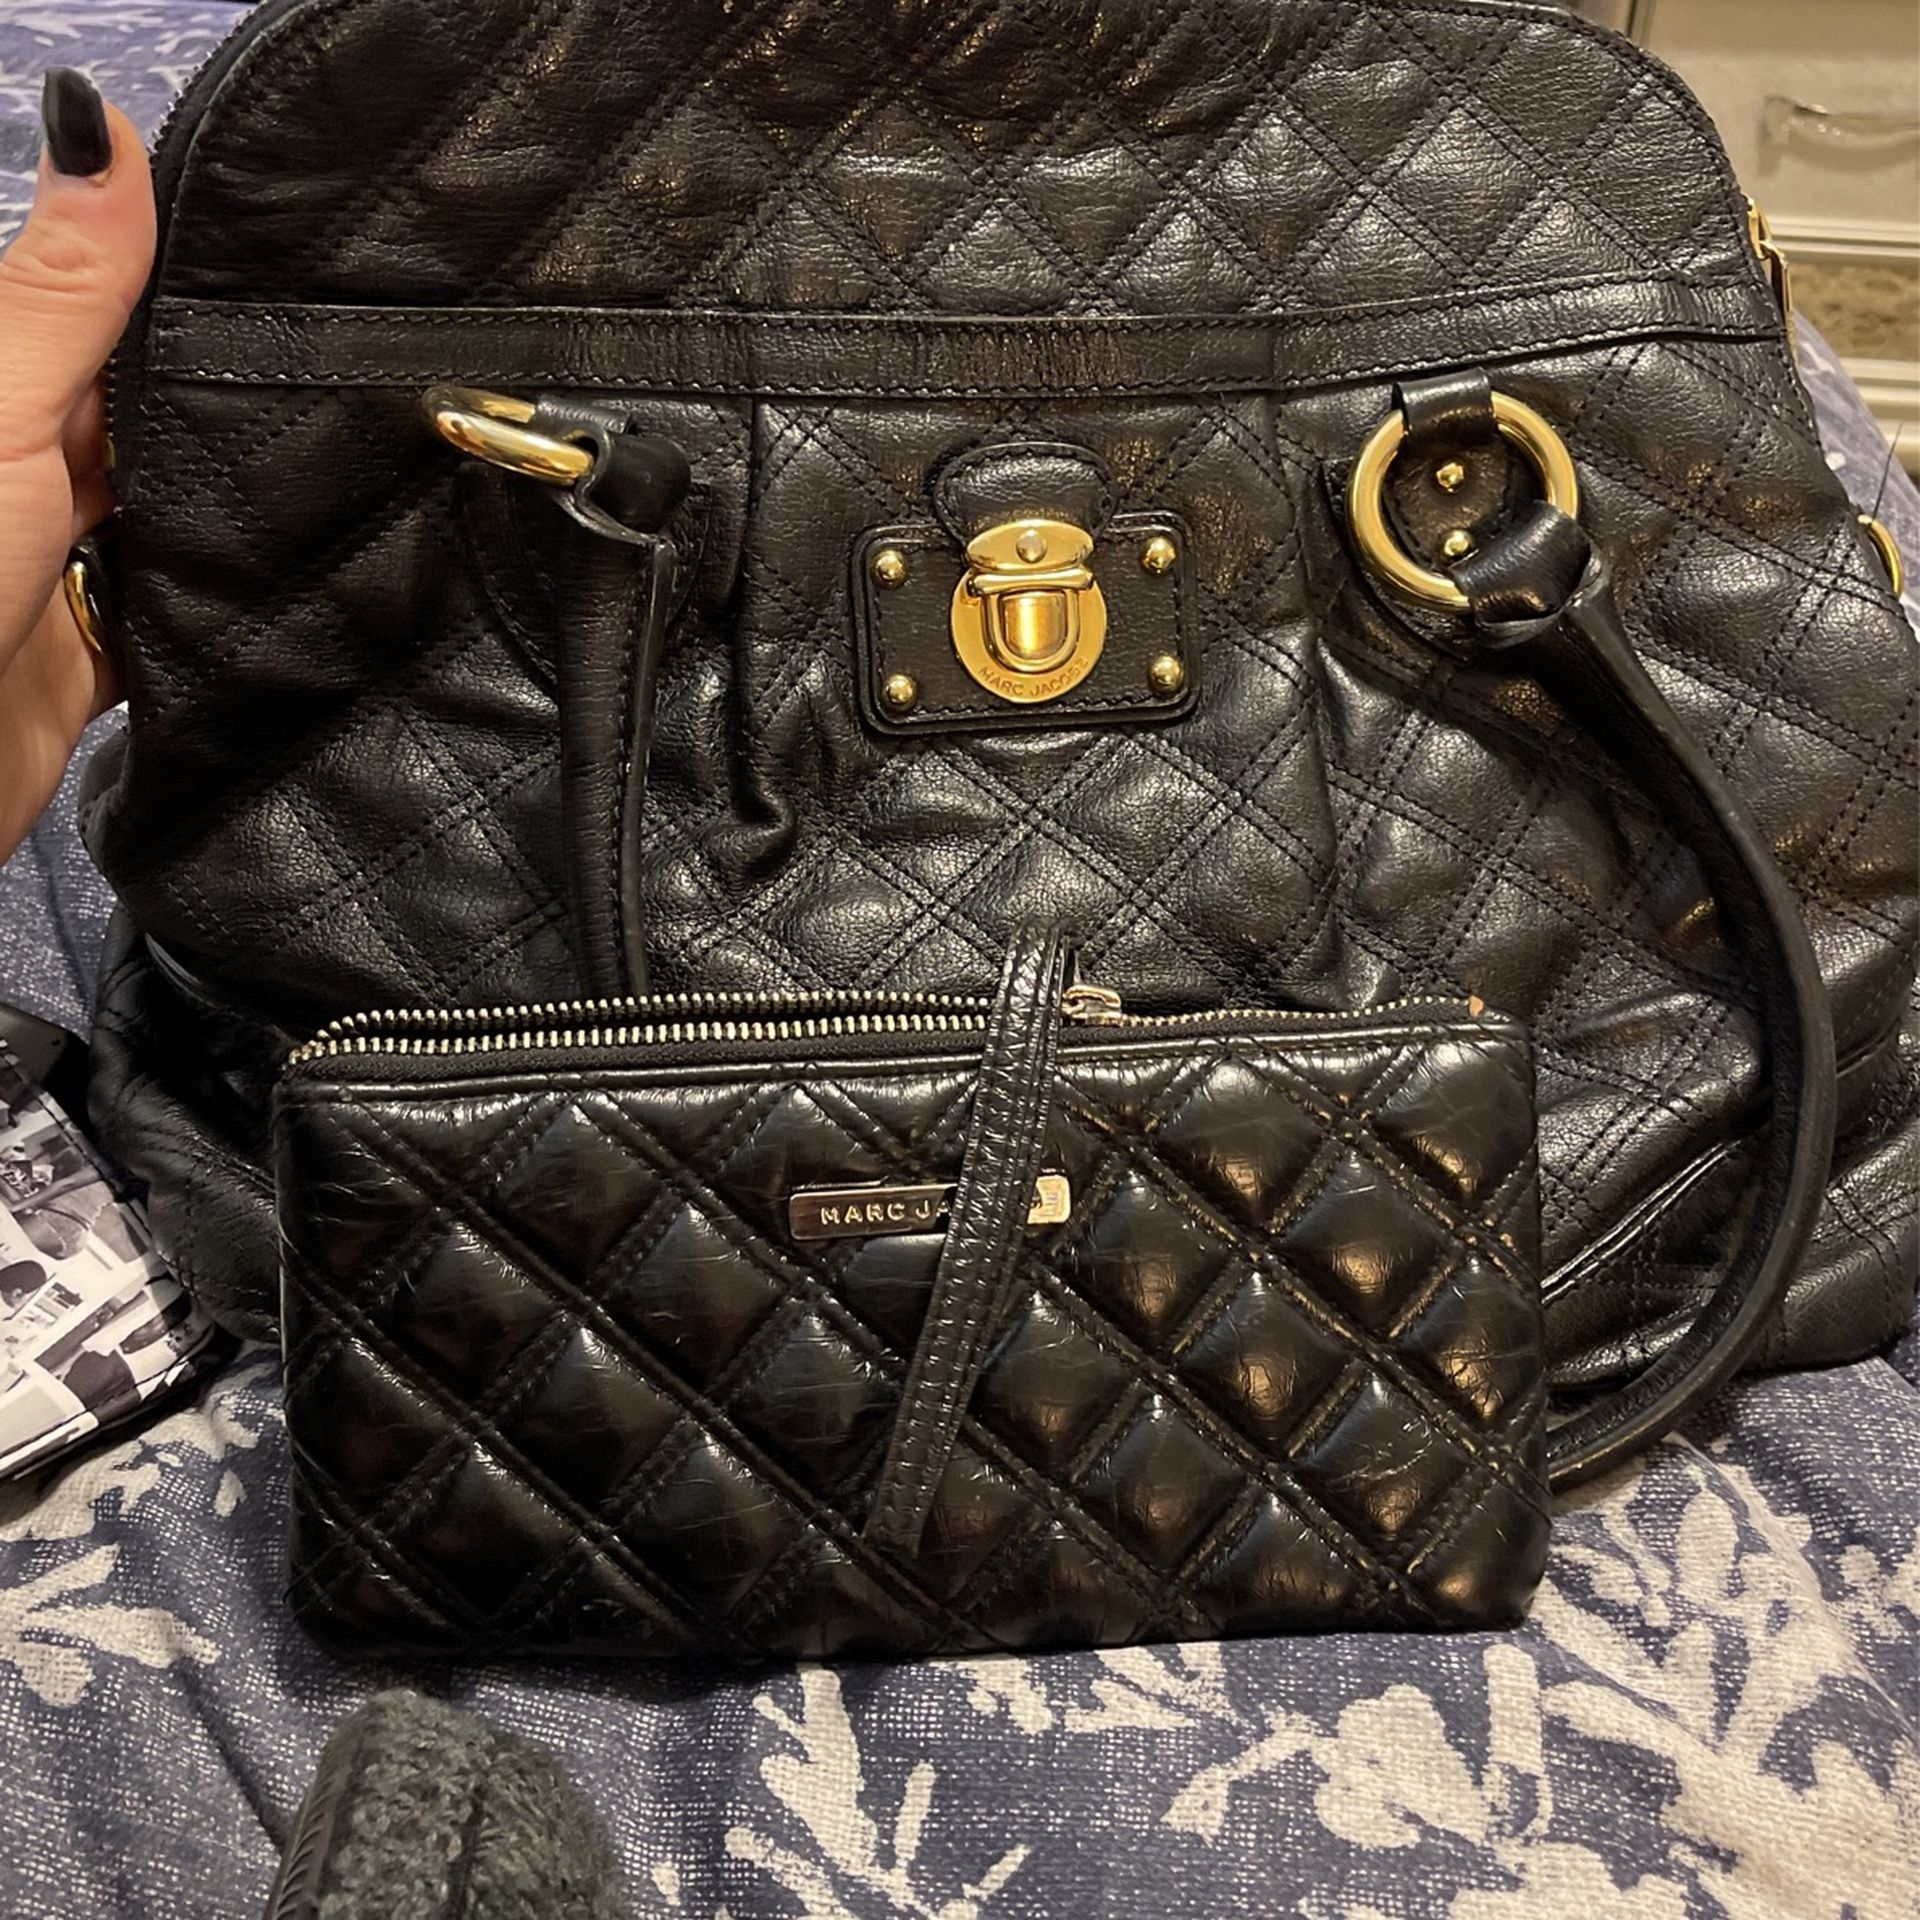 Marc Jacobs Quilted Leather Handbag And Clutch